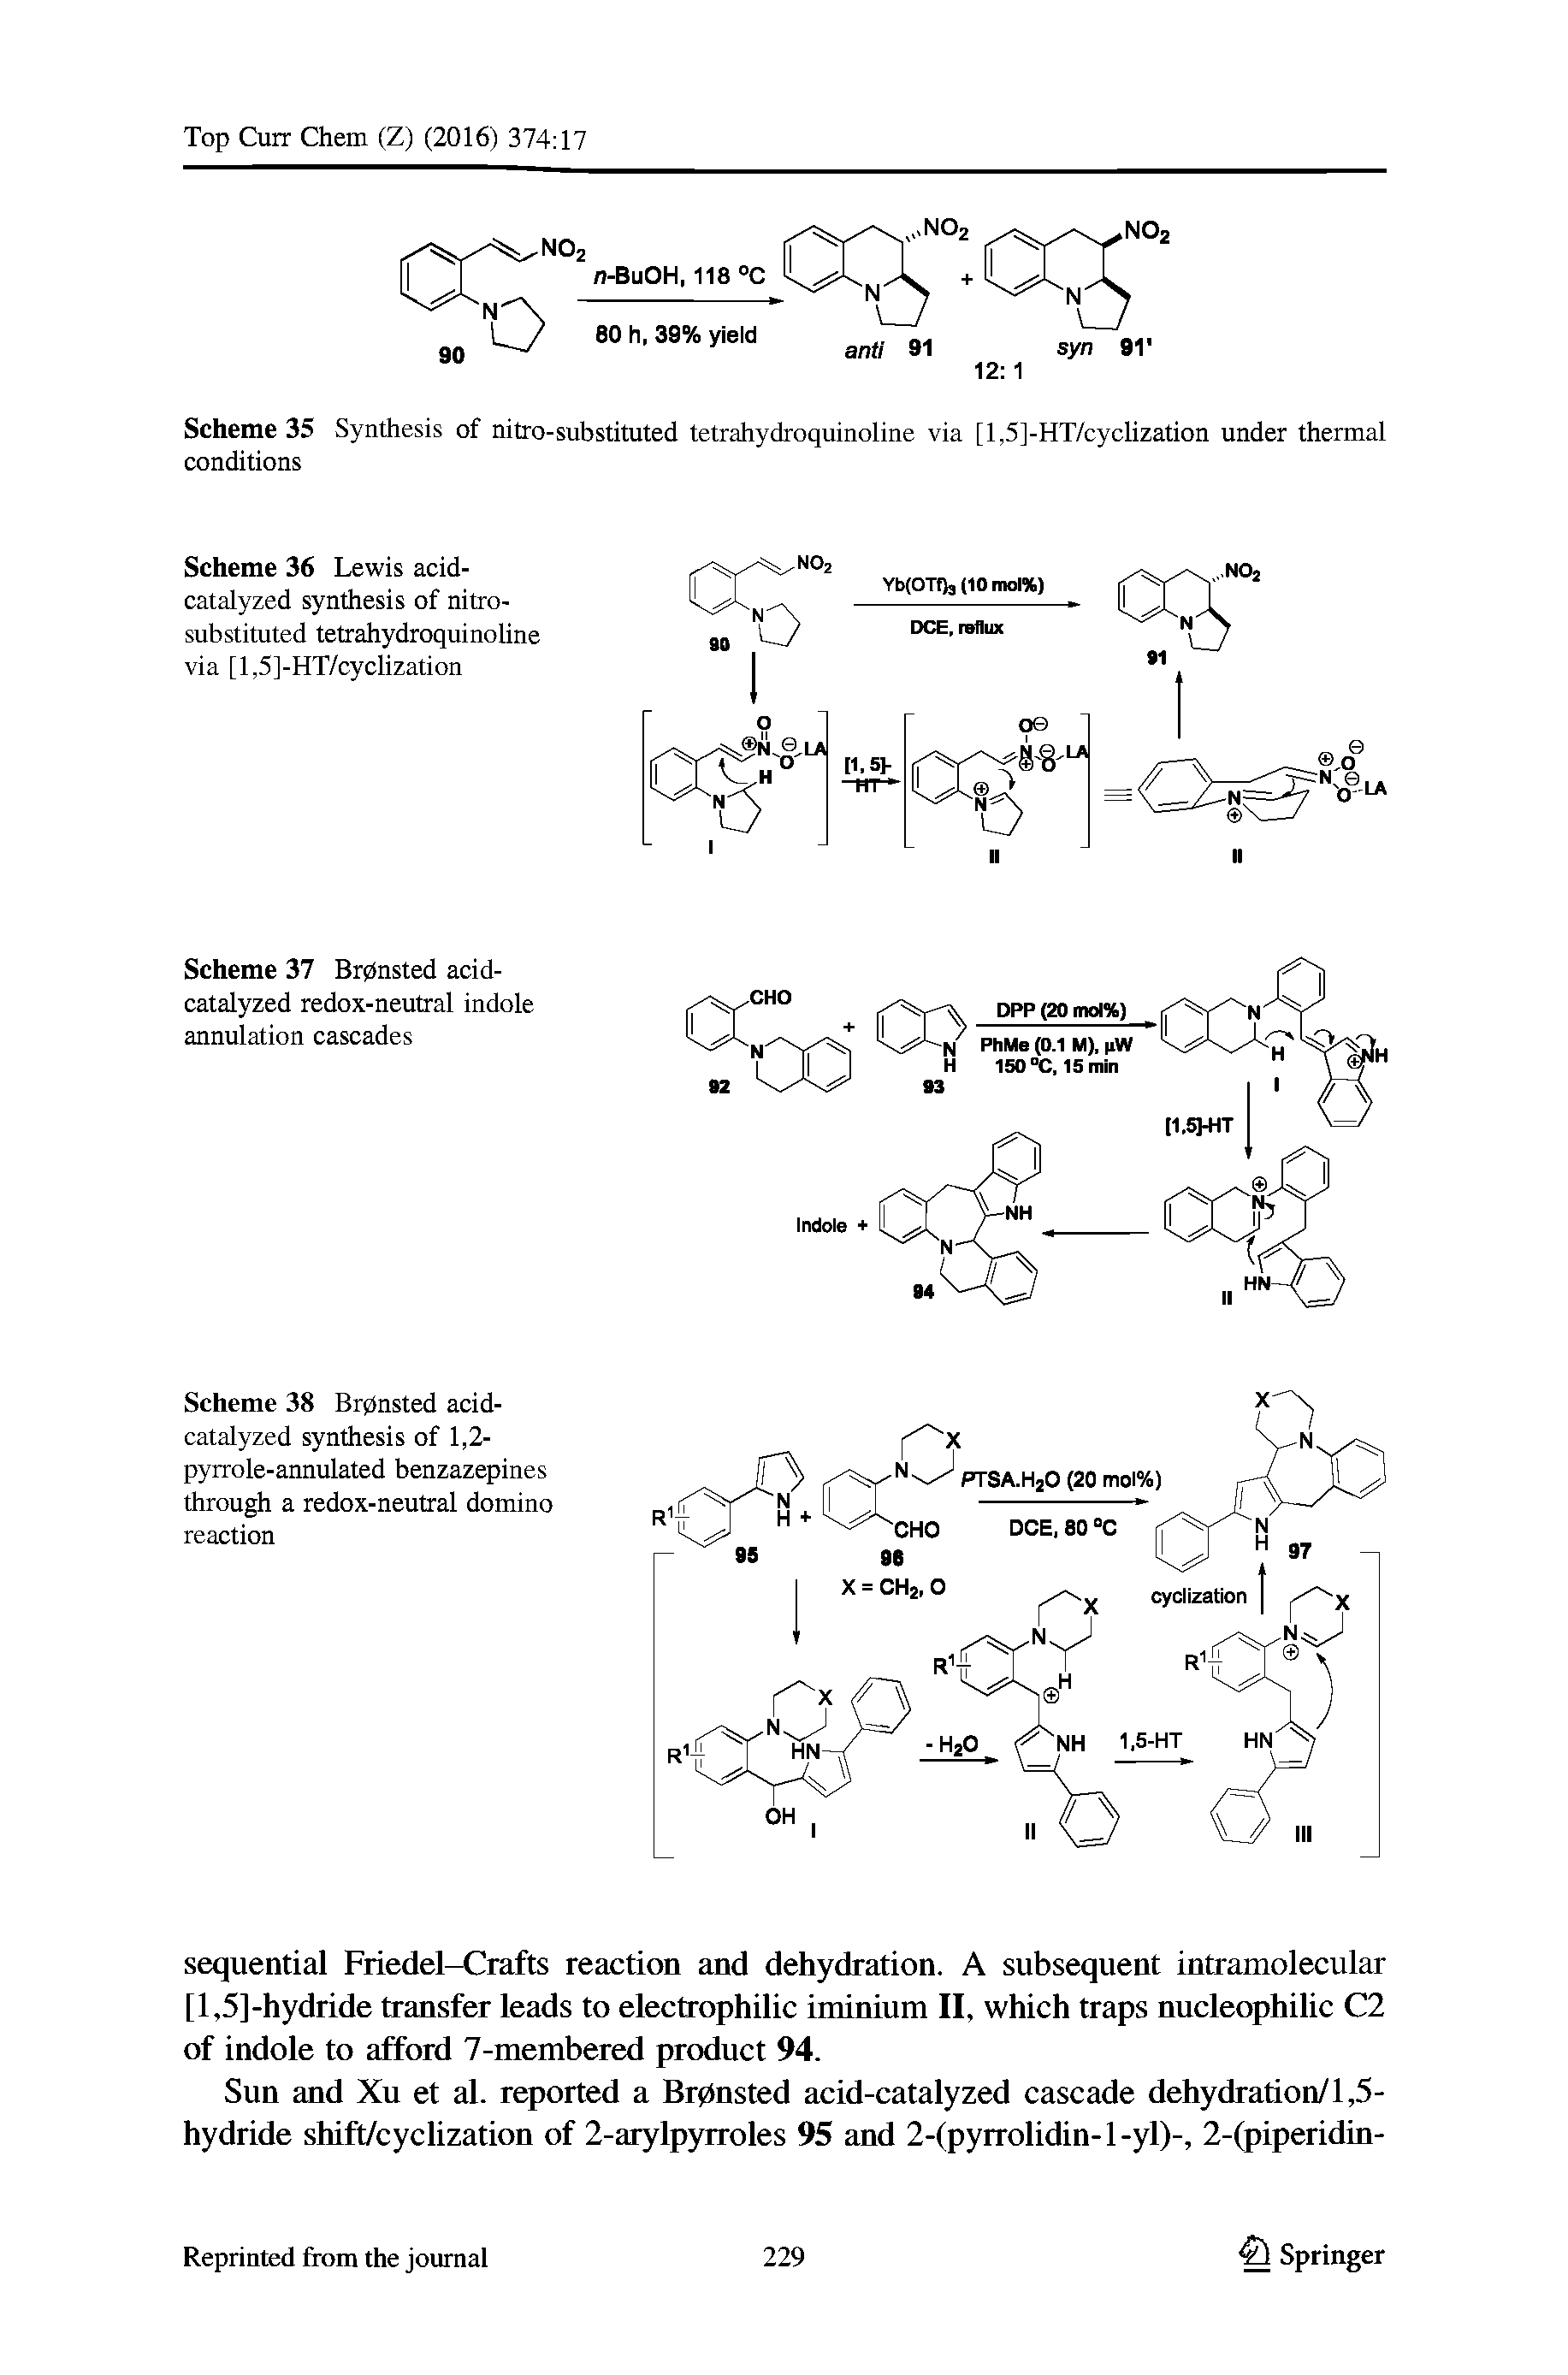 Scheme 38 Brpnsted acid-catalyzed synthesis of 1,2-pyrrole-annulated benzazepines through a redox-neutral domino reaction...